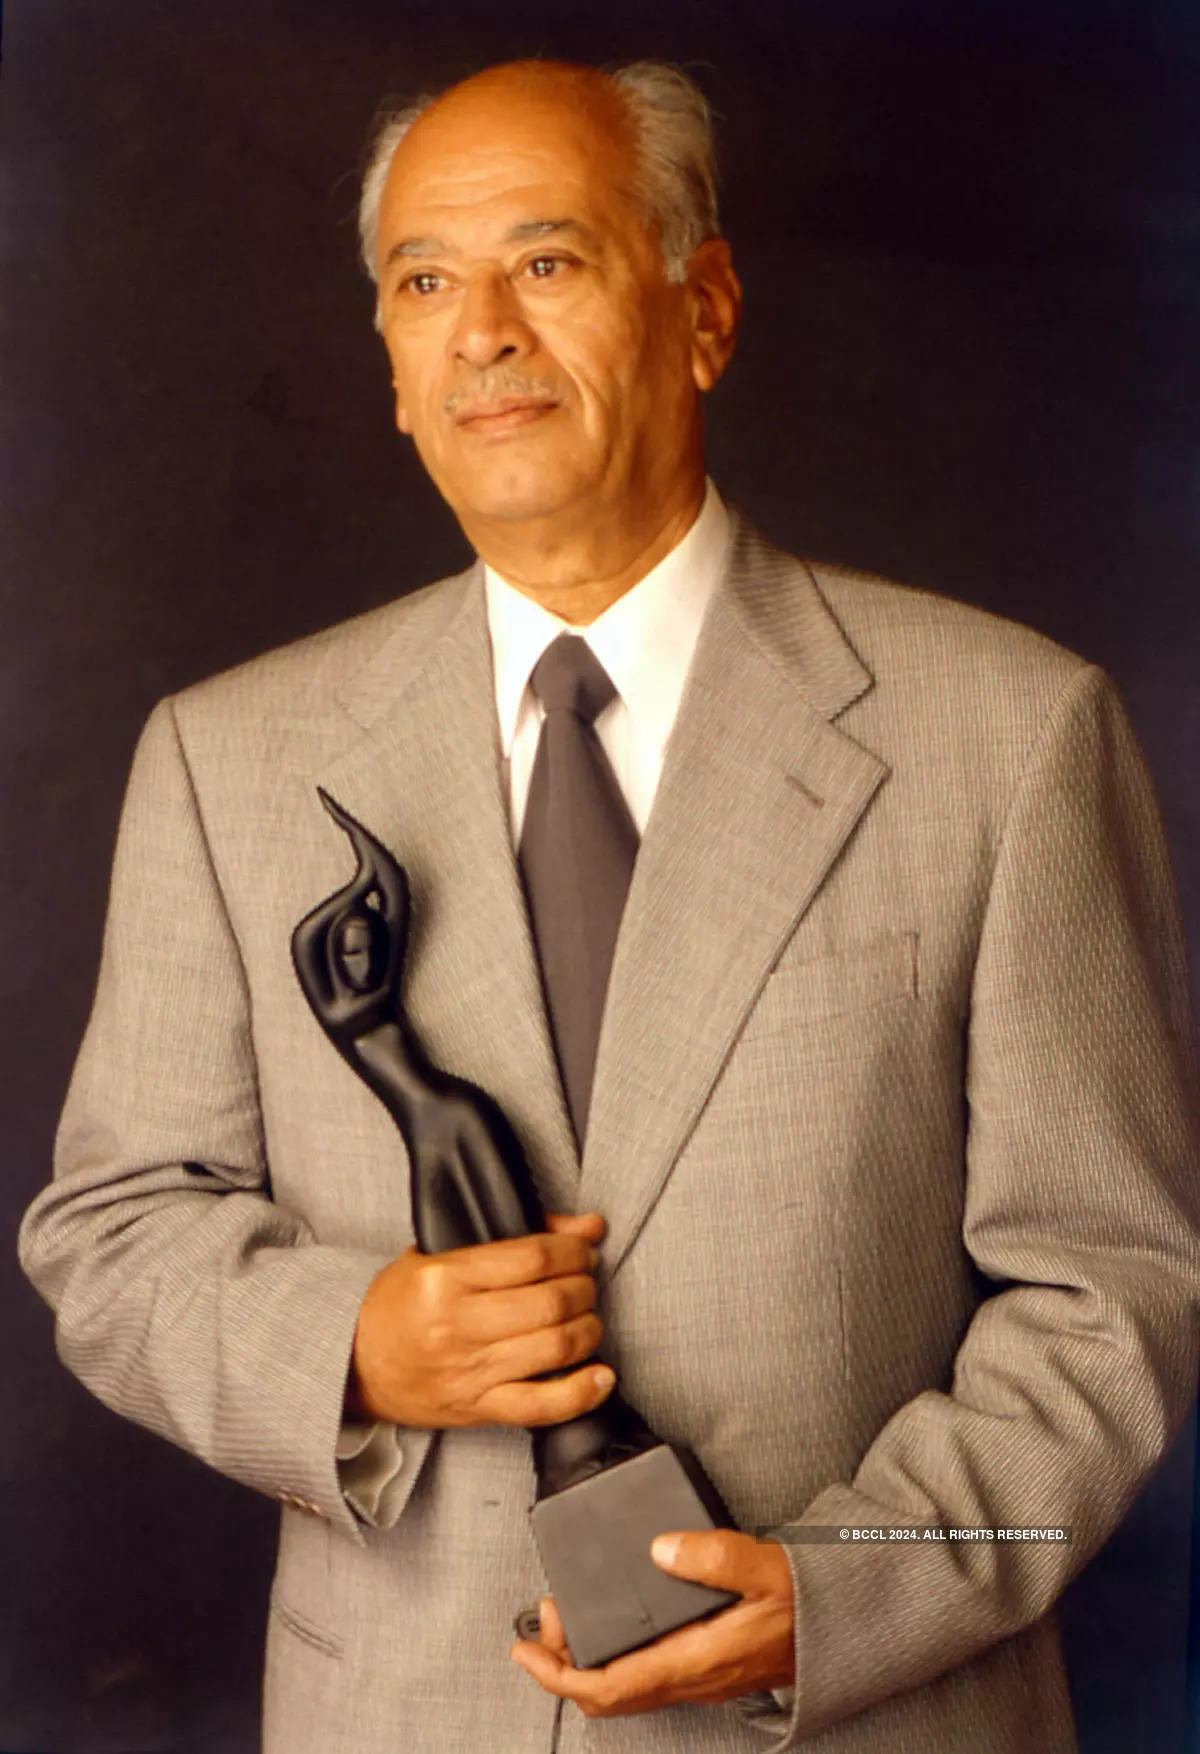 #GoldenFrames: Yash Johar, the man who showcased family values and tradition in his movies